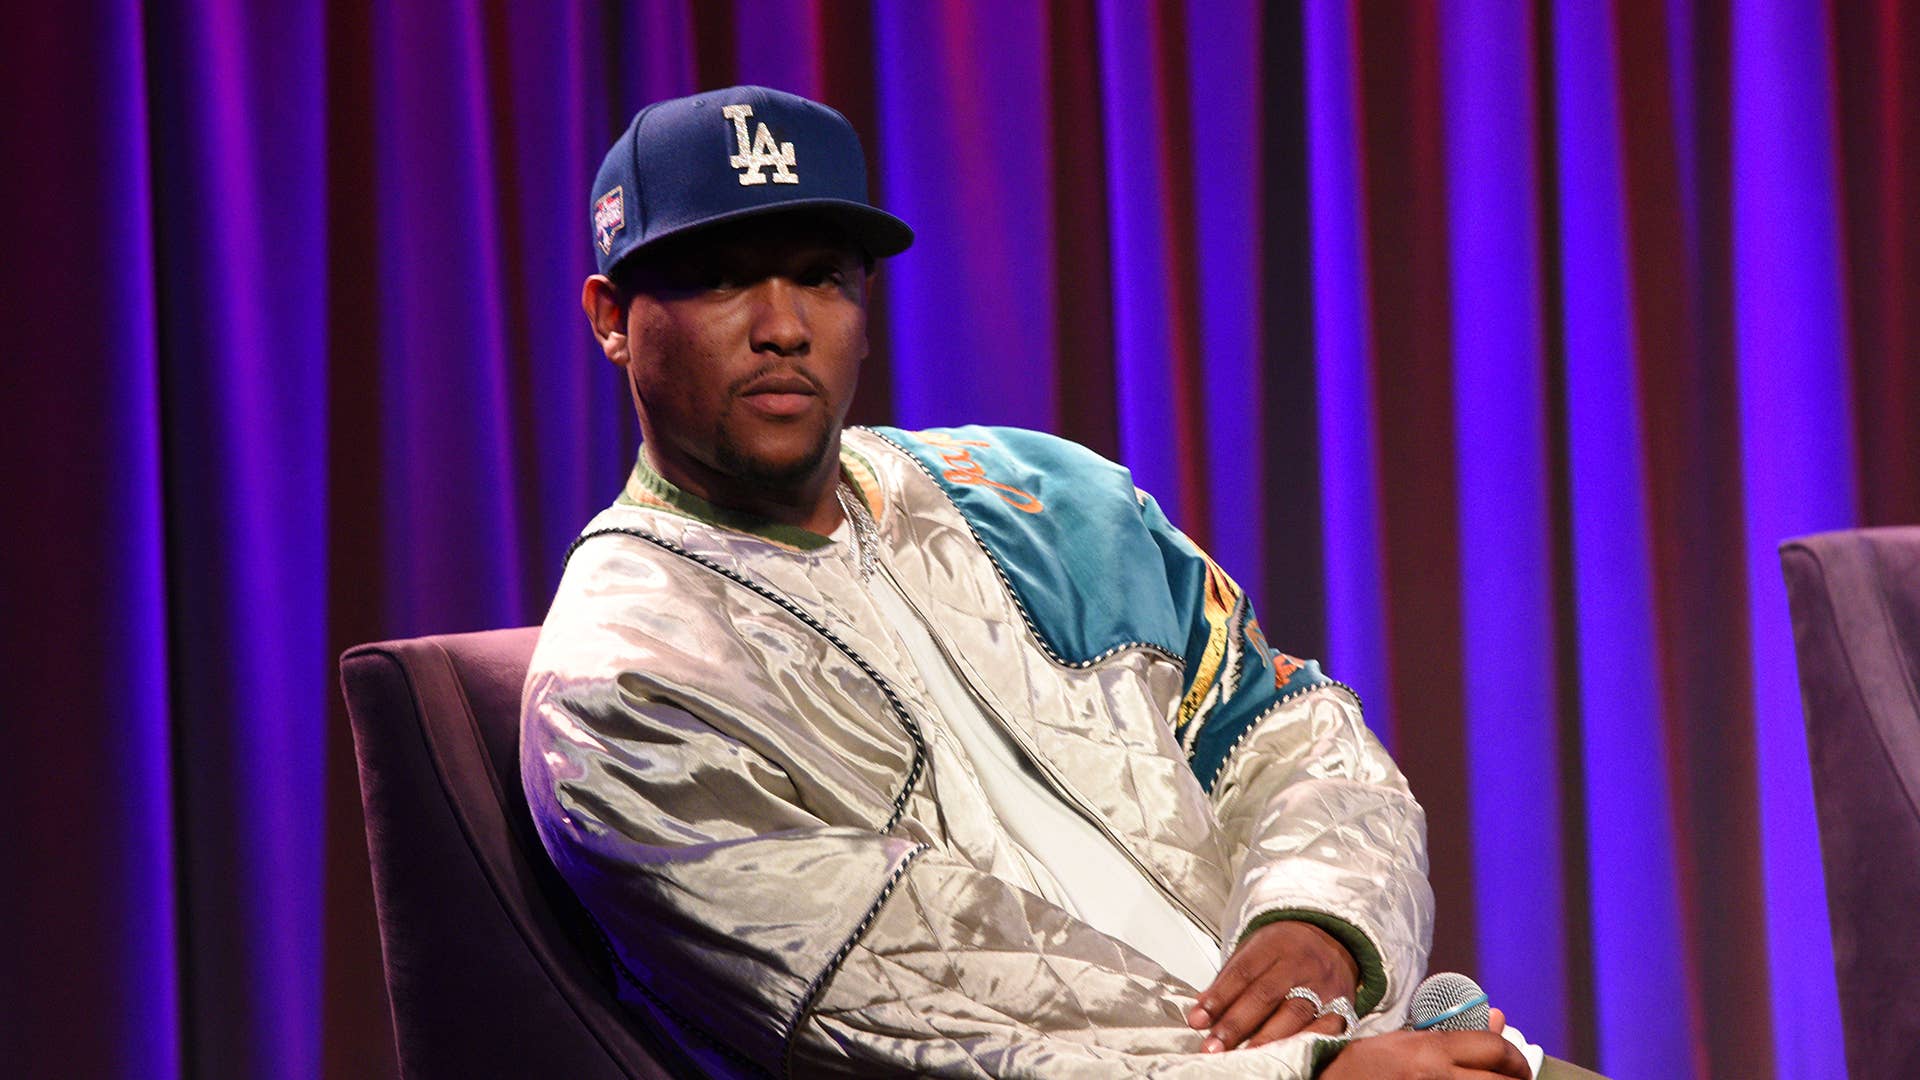 Hit-Boy speaks at The GRAMMY Museum on October 19, 2021 in Los Angeles, California.